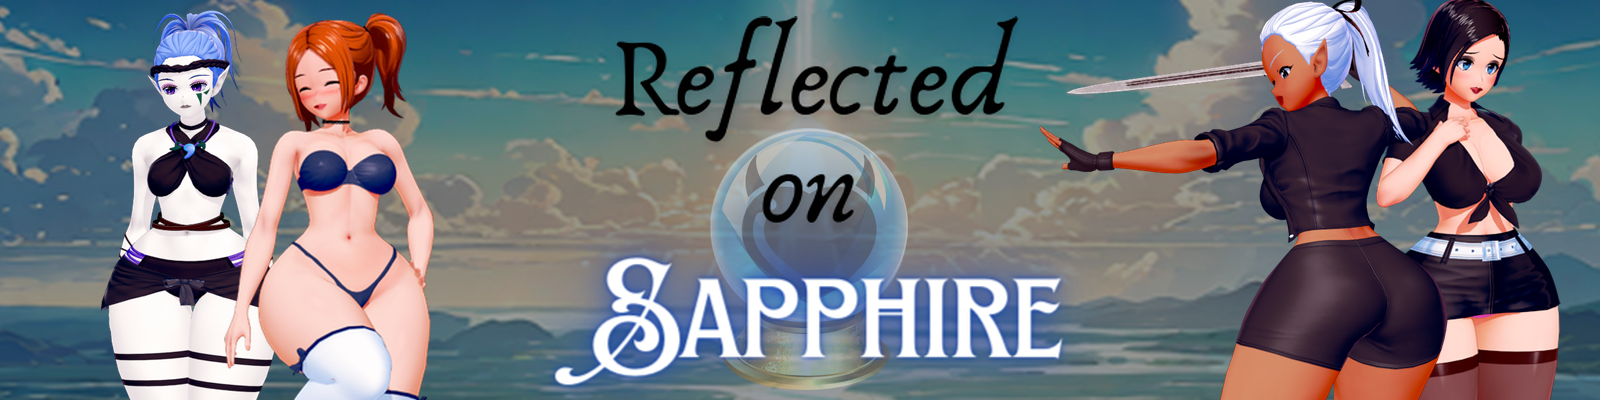 Reflected on Sapphire poster